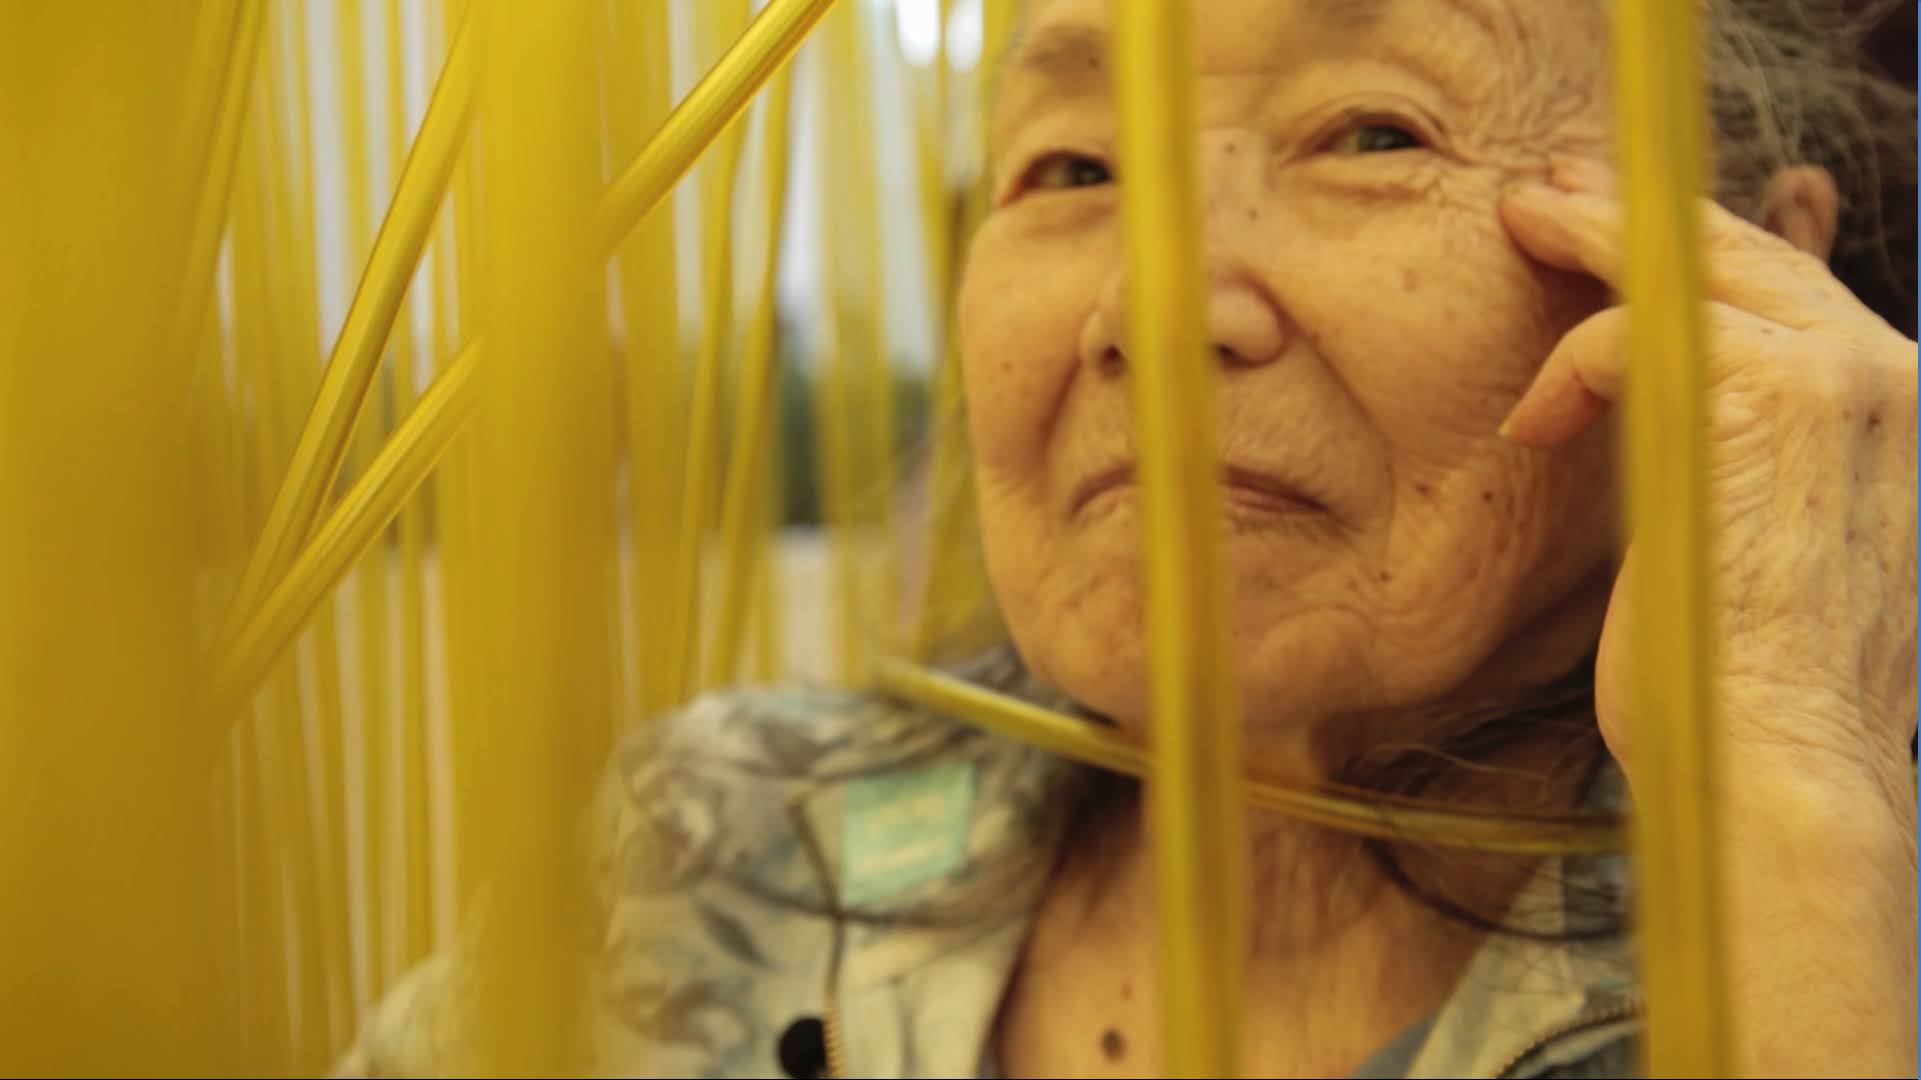 An old woman smiles behind a curtain of yellow plastic strings.